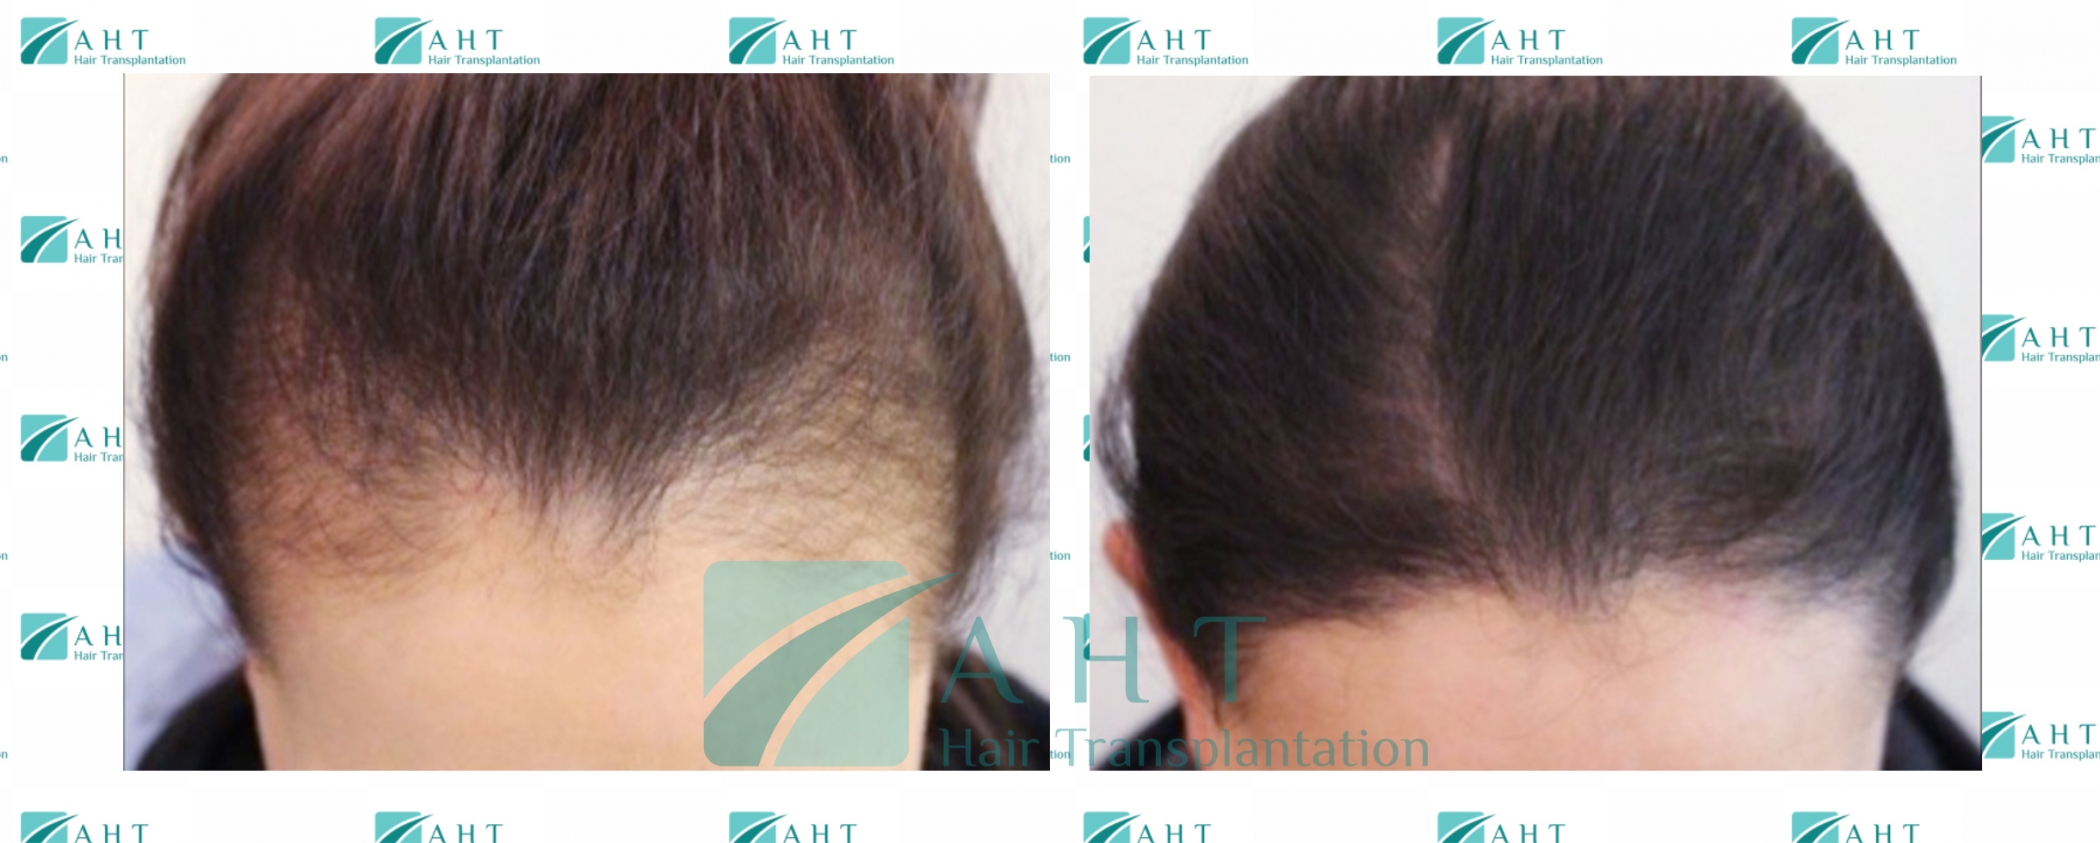 Hair transplantation is a solution for women as well